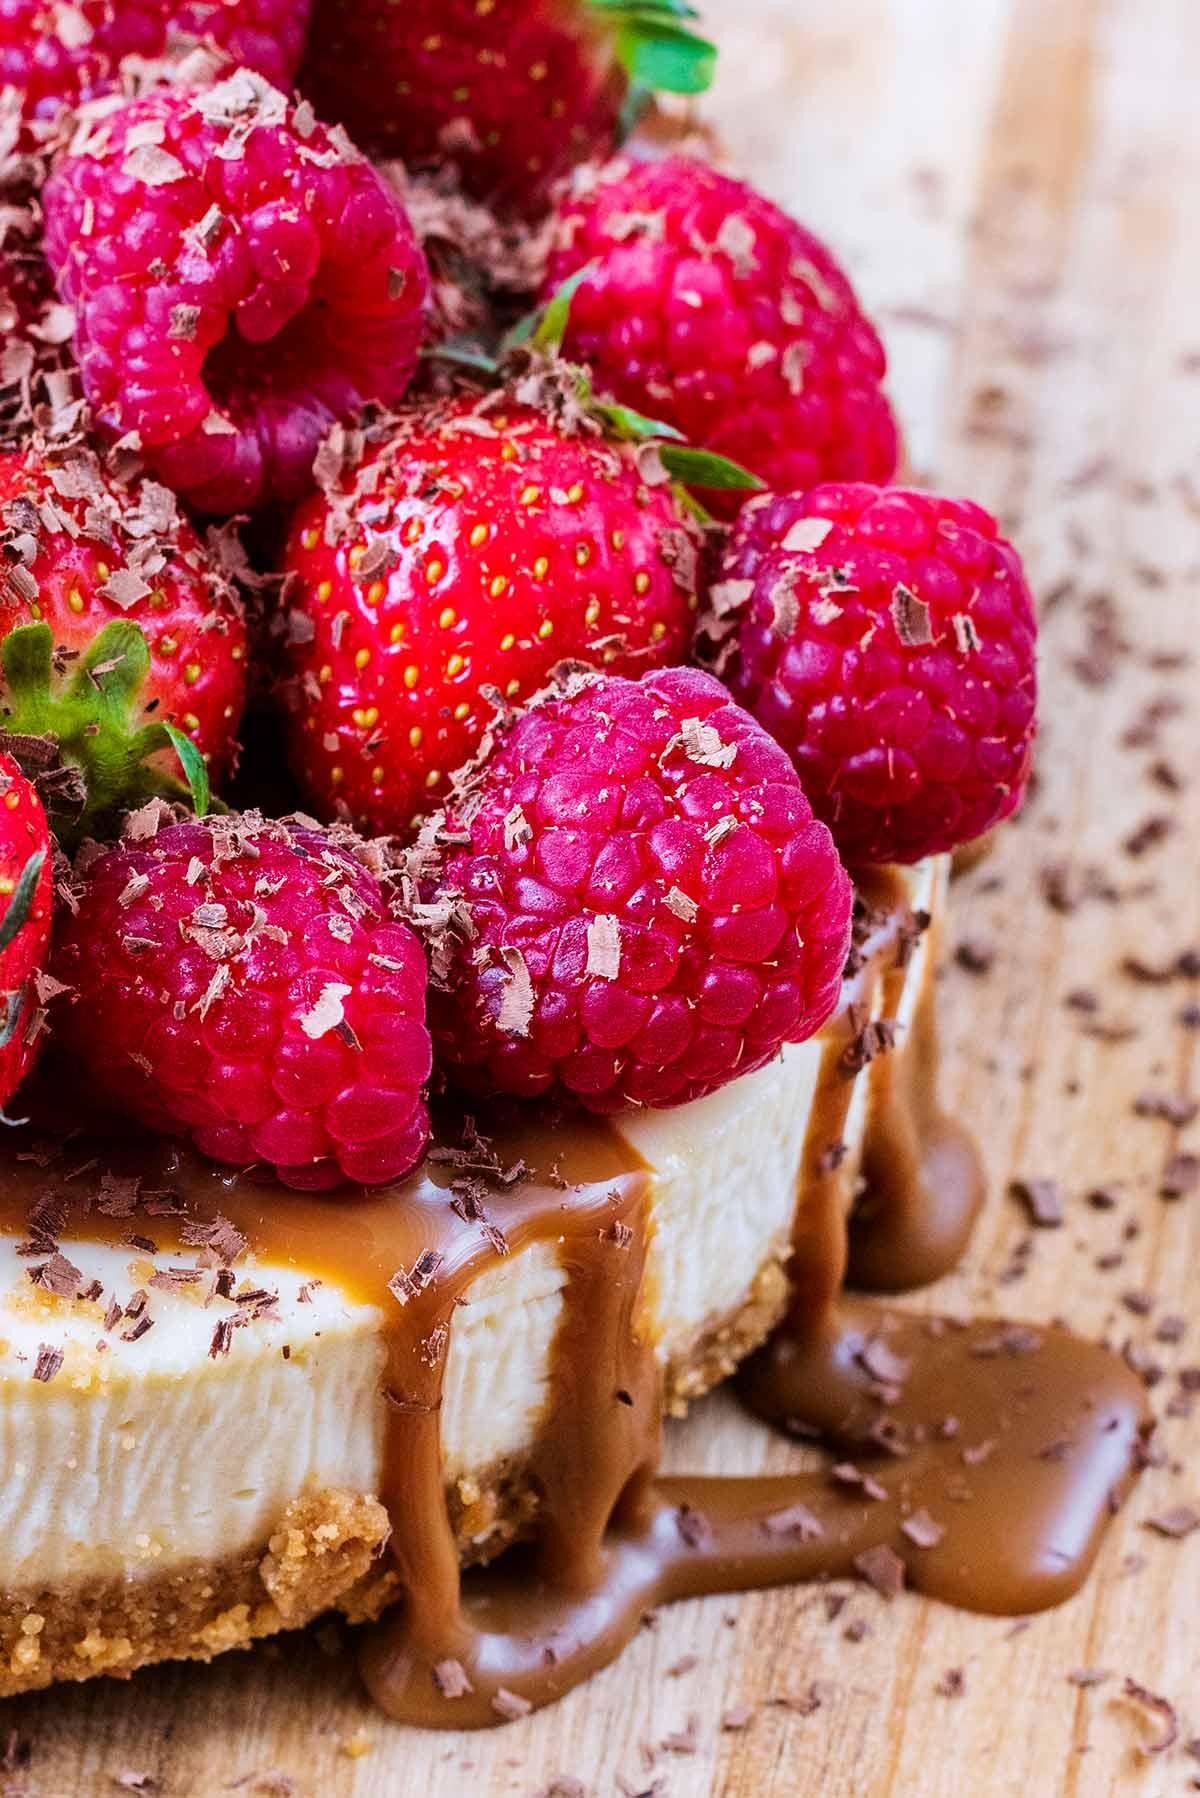 Strawberries and raspberries on top of a cheesecake with caramel sauce dripping down the side.